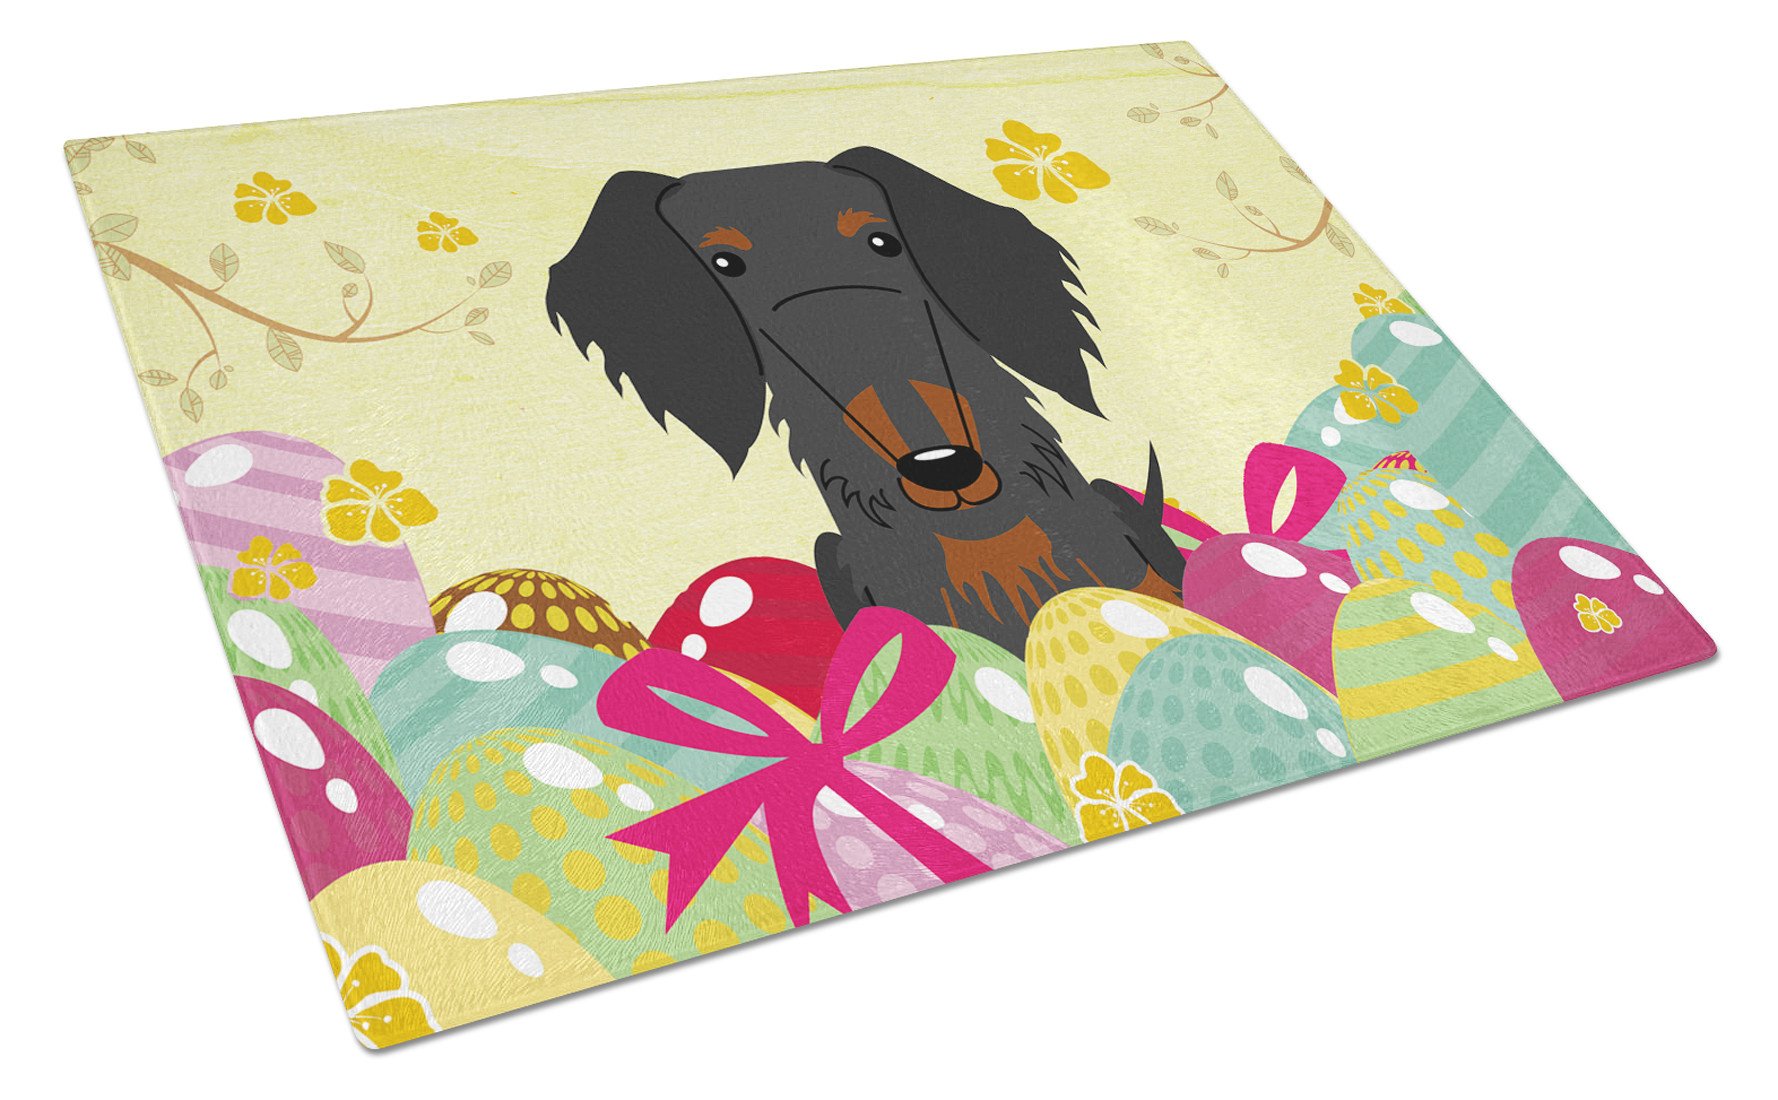 Easter Eggs Wire Haired Dachshund Black Tan Glass Cutting Board Large BB6127LCB by Caroline's Treasures